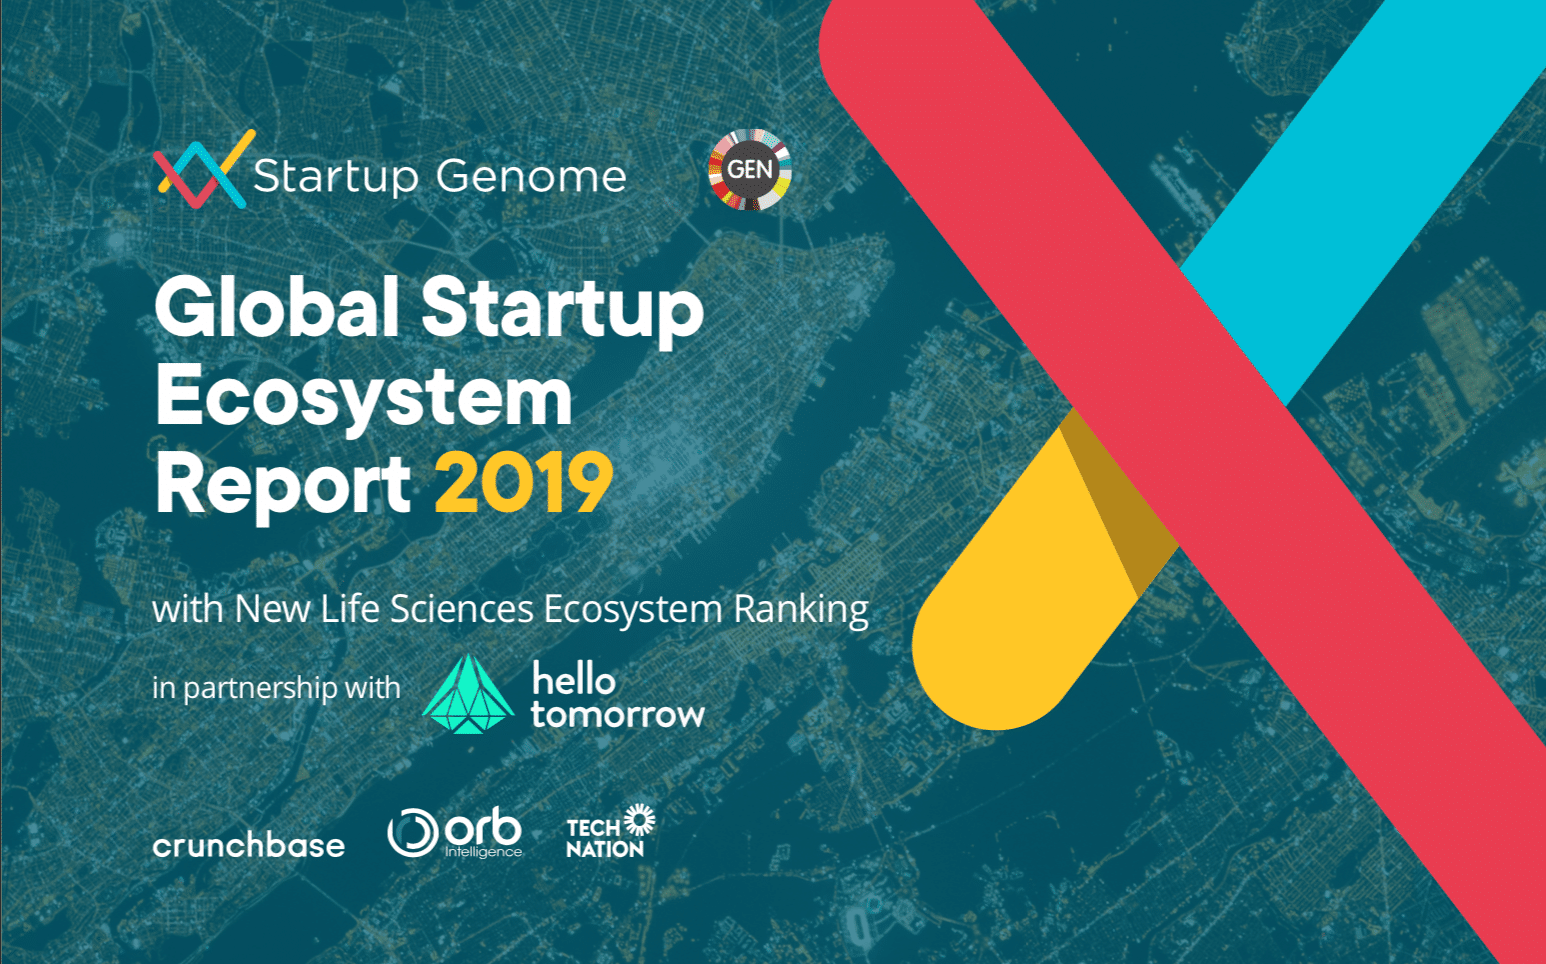 Global Startup Ecosystem: Startup Genome Report